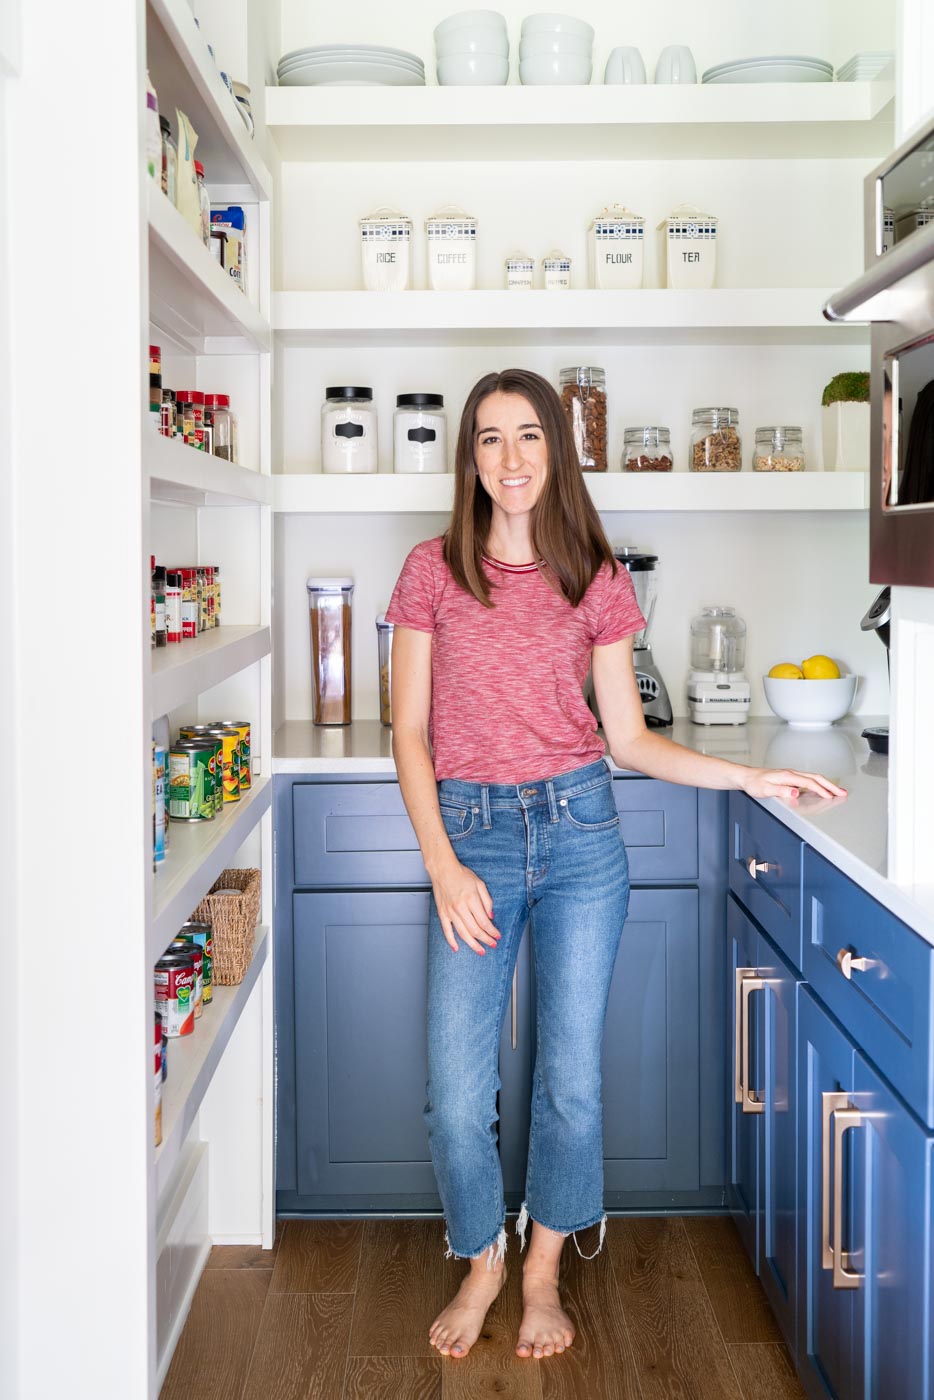 Woman standing in an organized pantry with white shelves and blue cabinets